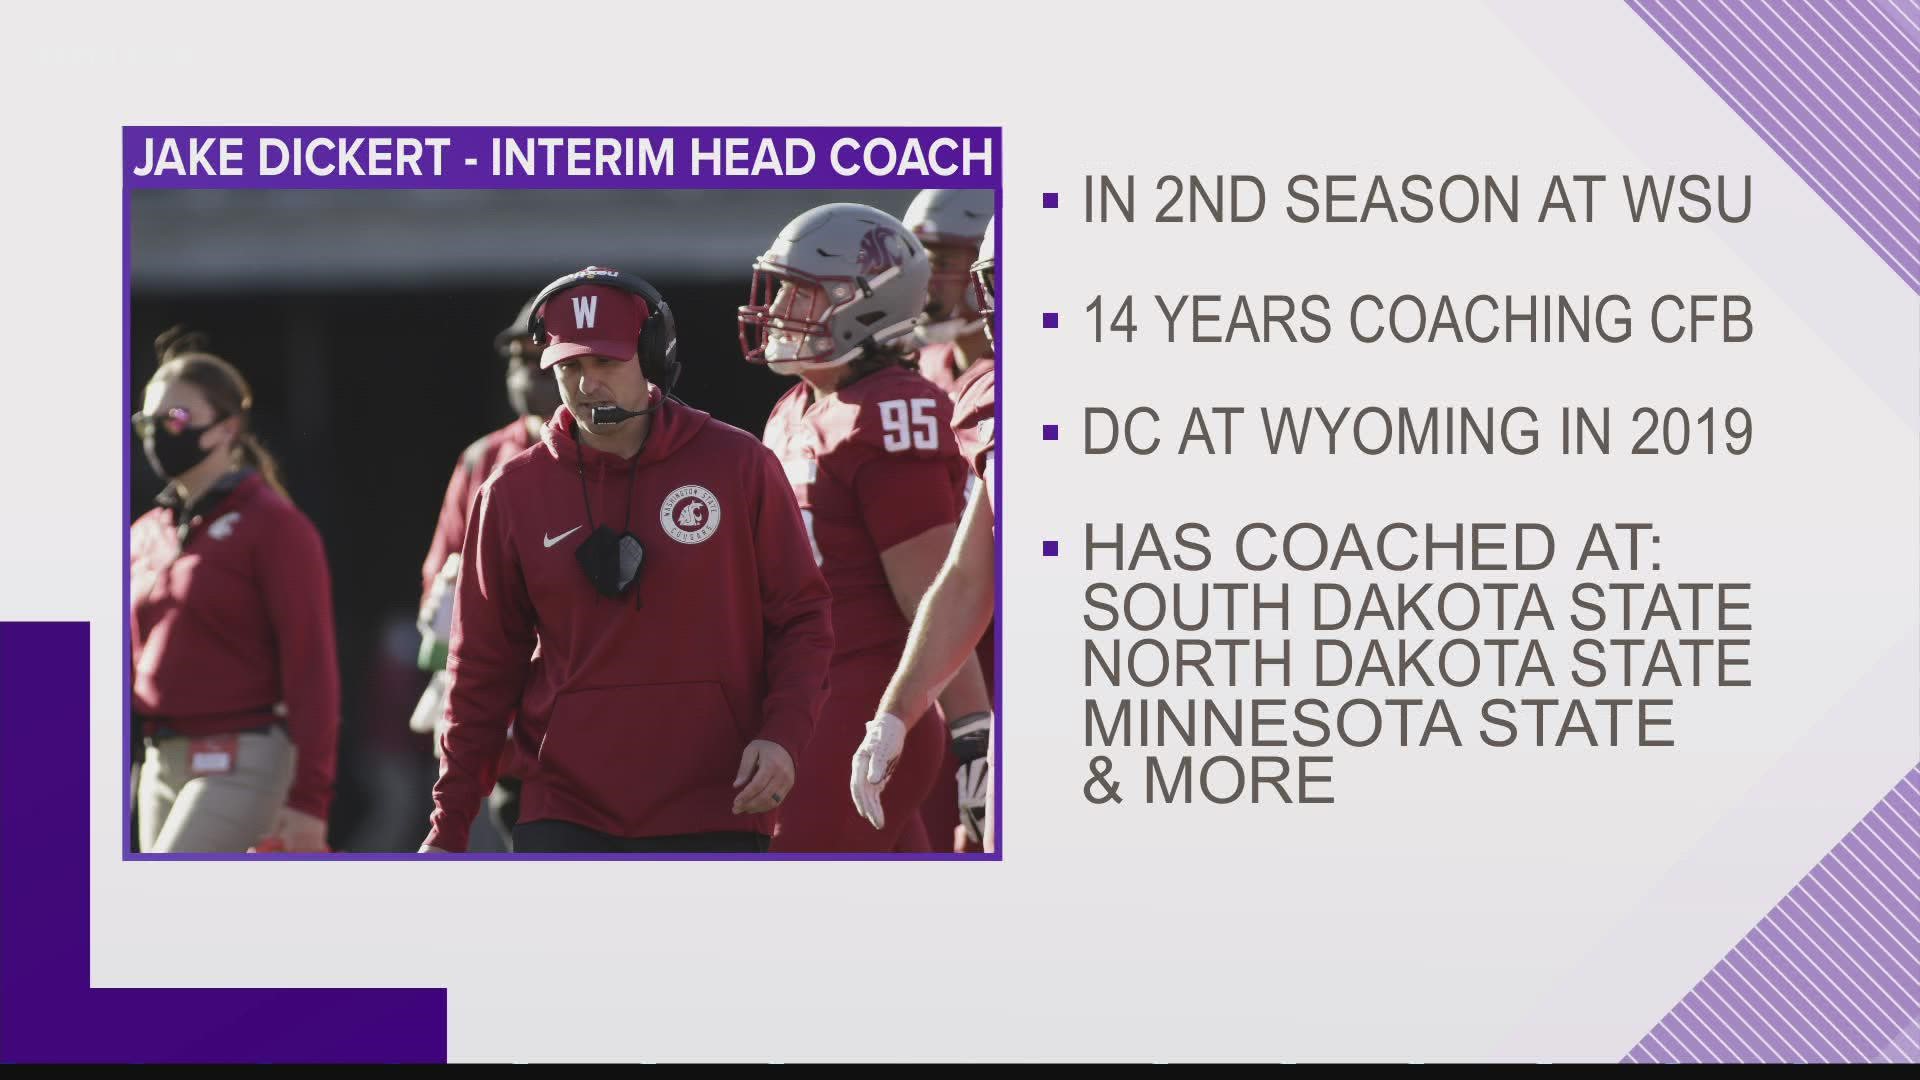 Jake Dickert has 14 years of football coaching experience. He was most recently the defensive coordinator at WSU.